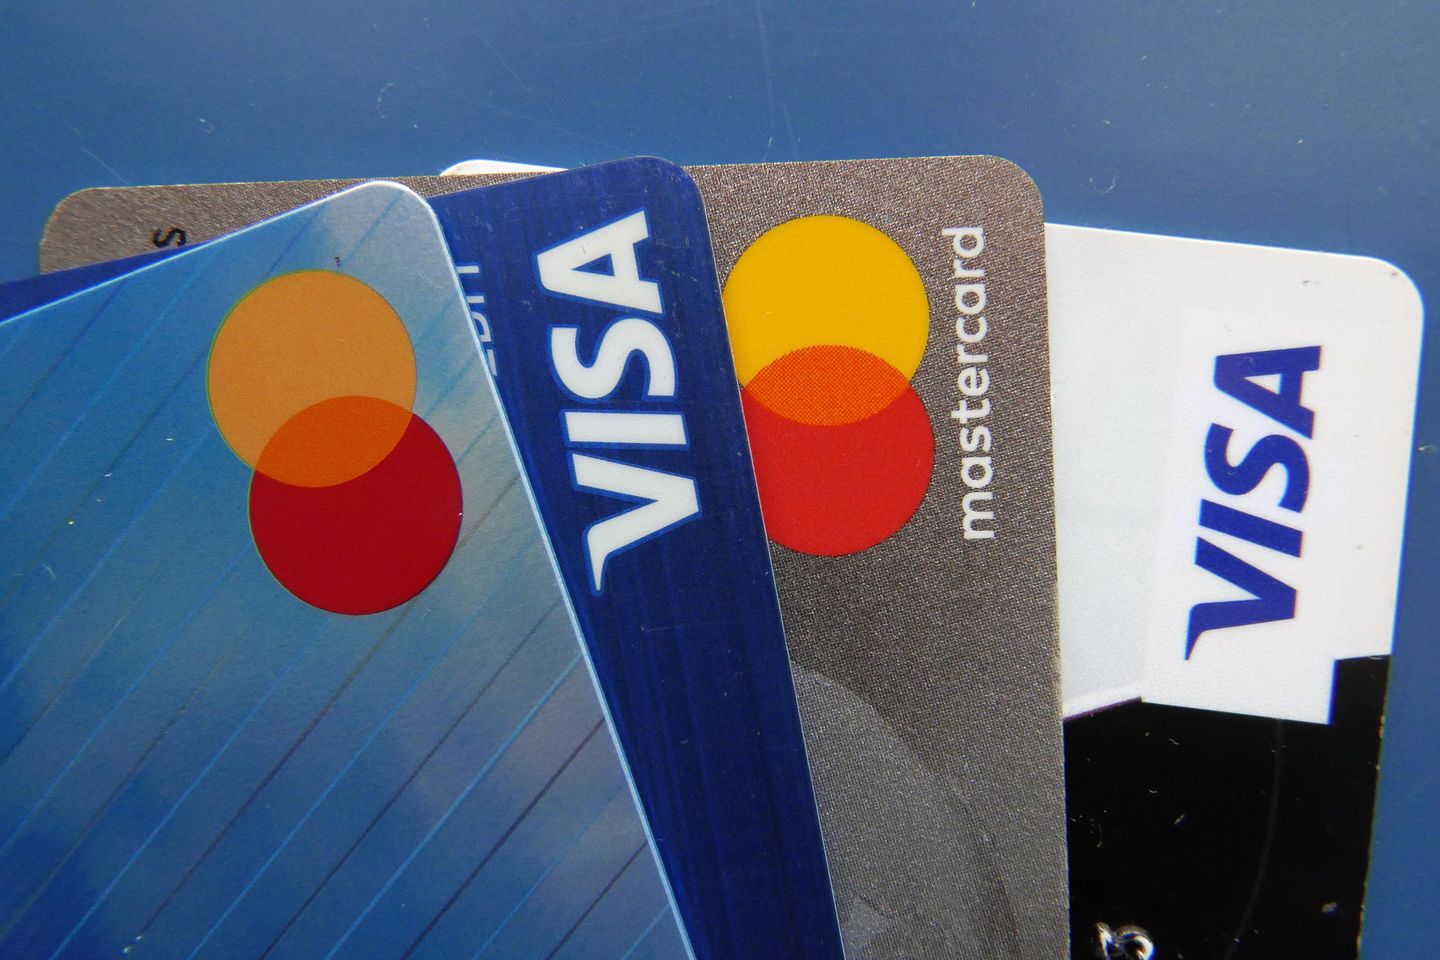 Americans rely on credit cards to ease pain of inflation, spend through summer